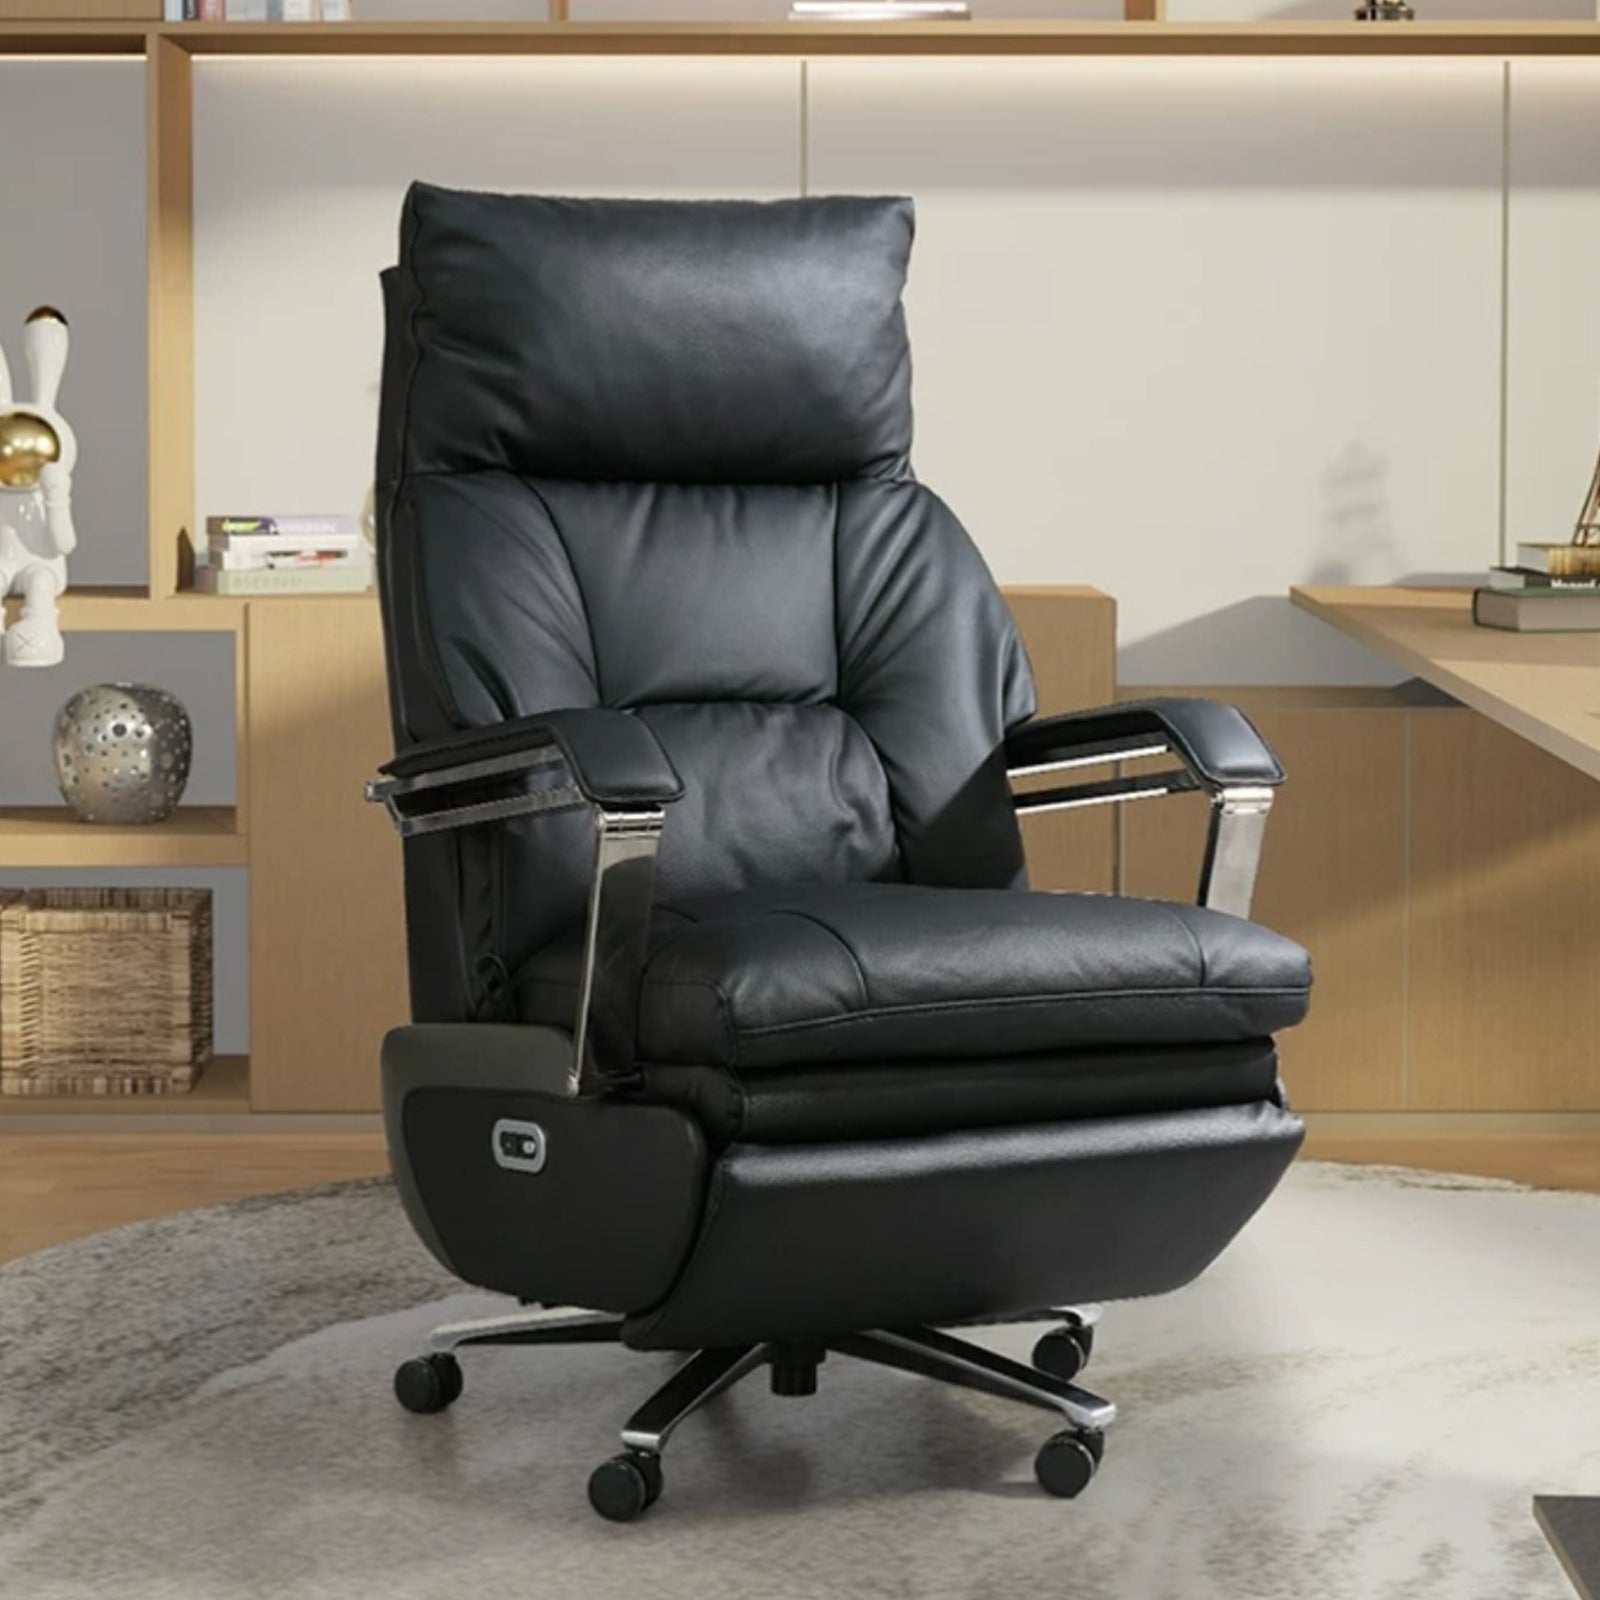 Adjustable Electric Office Chair placed in room